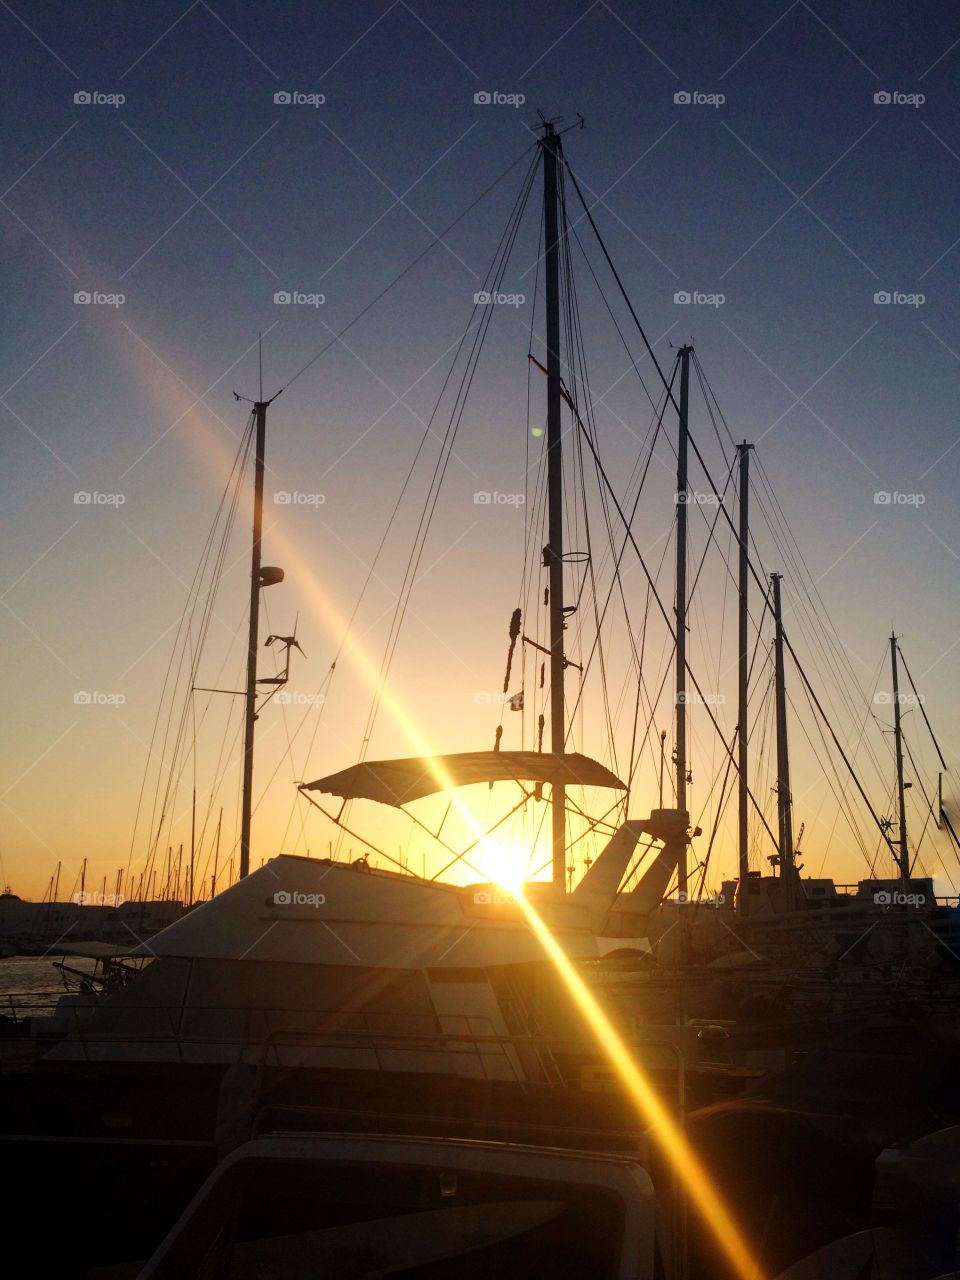 sun rays from behind the boats. boats at sunset with rays from behind the shadows 